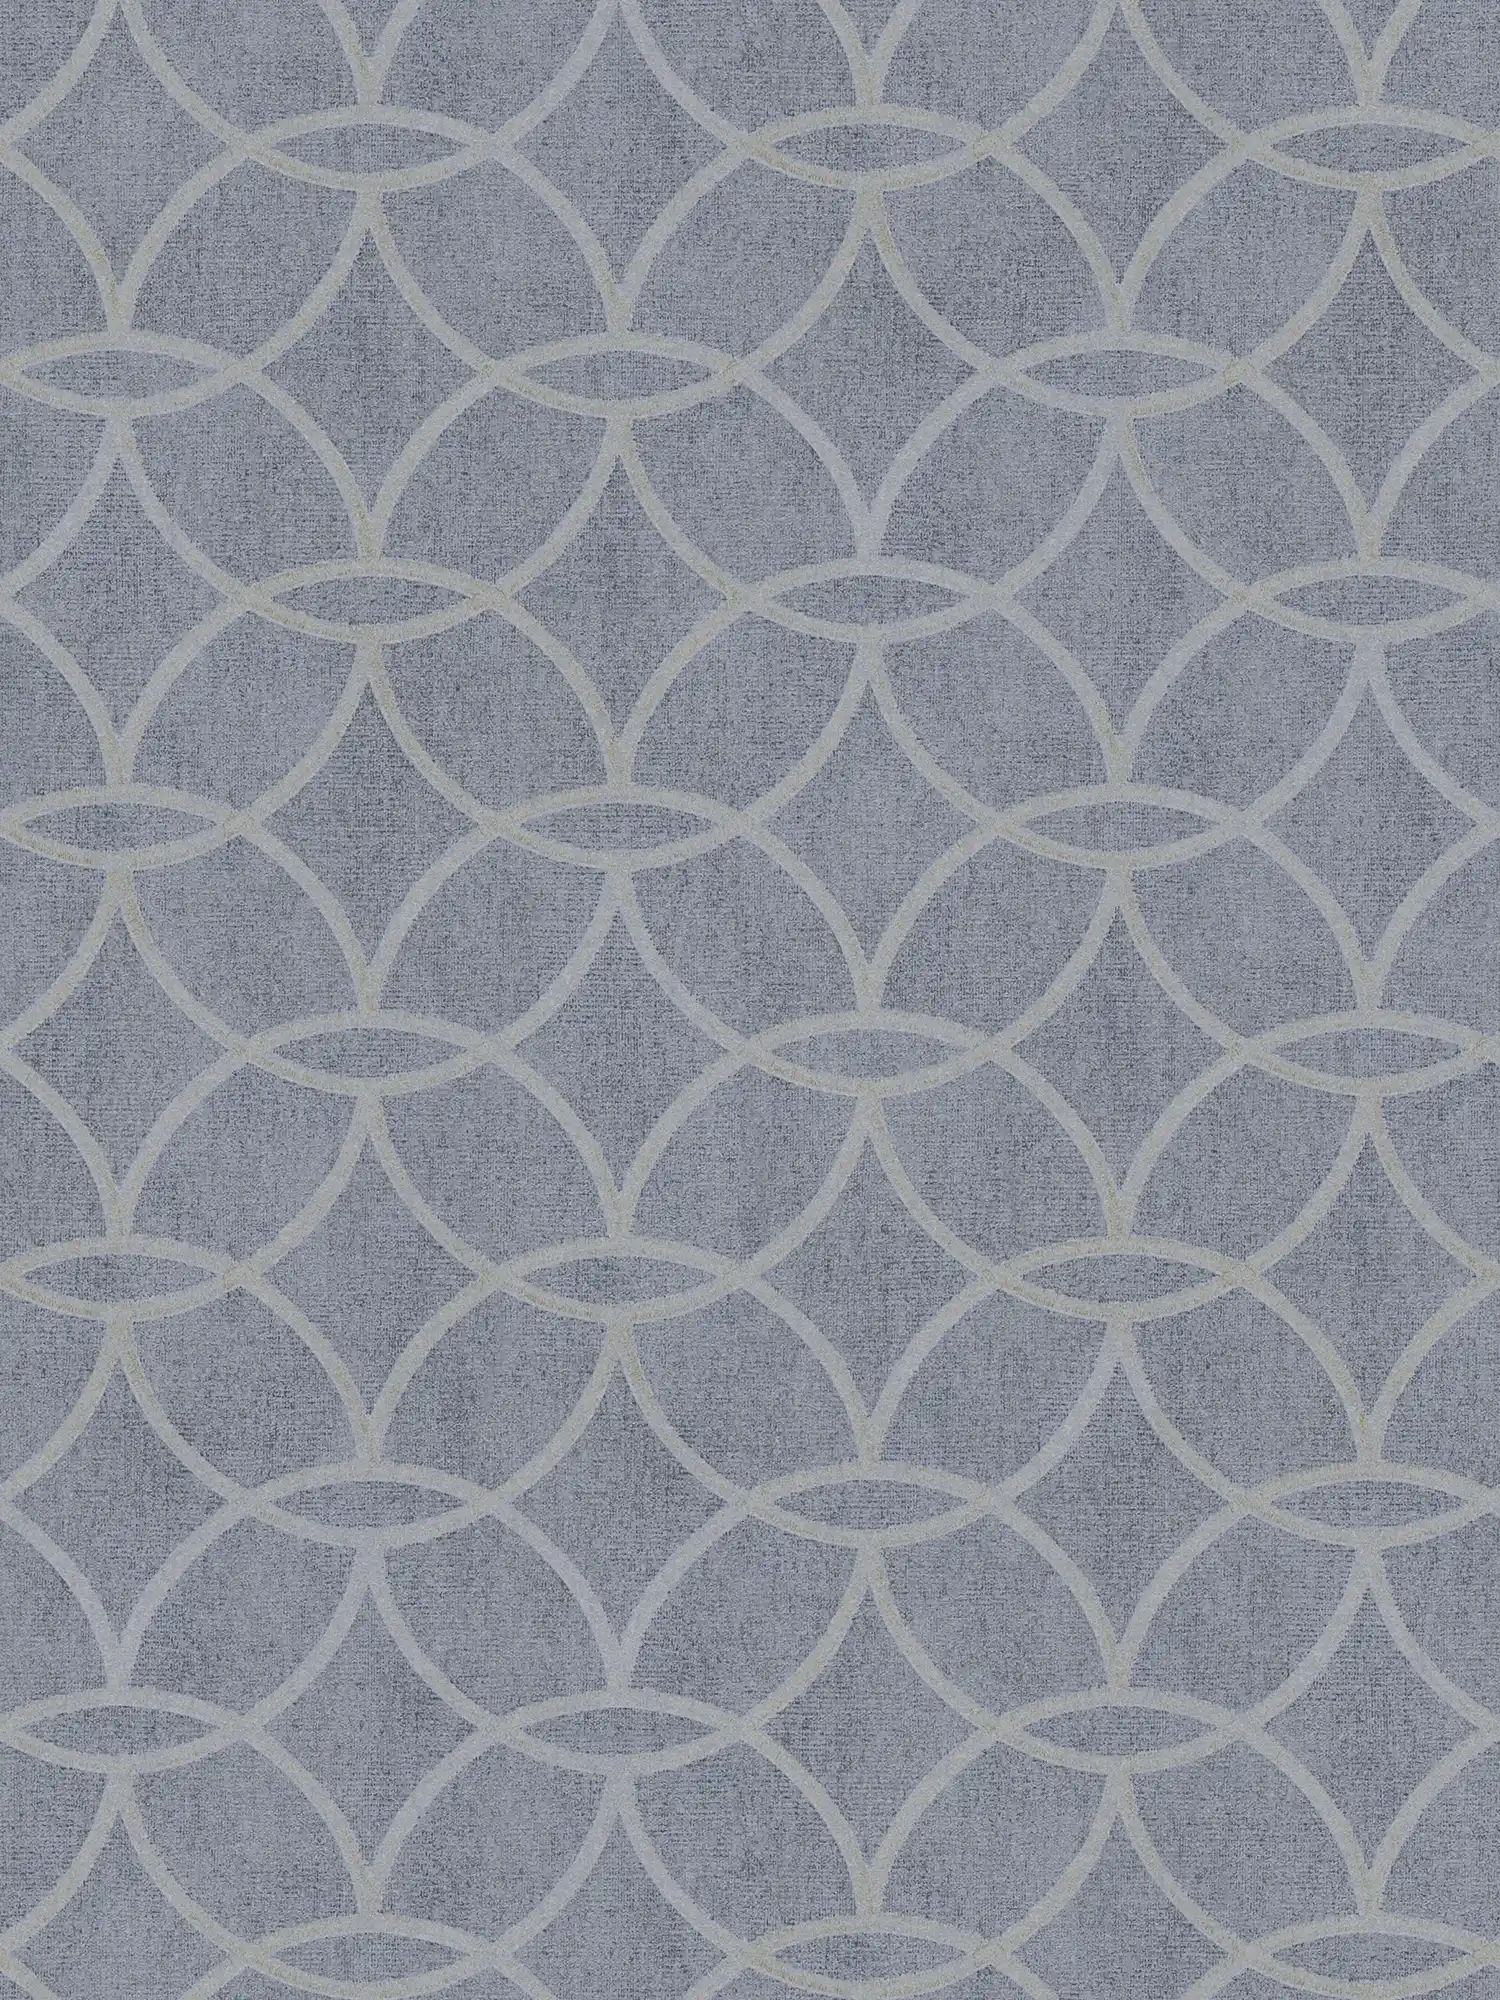 Pattern wallpaper non-woven with geometric design & shimmer effect - blue, grey
